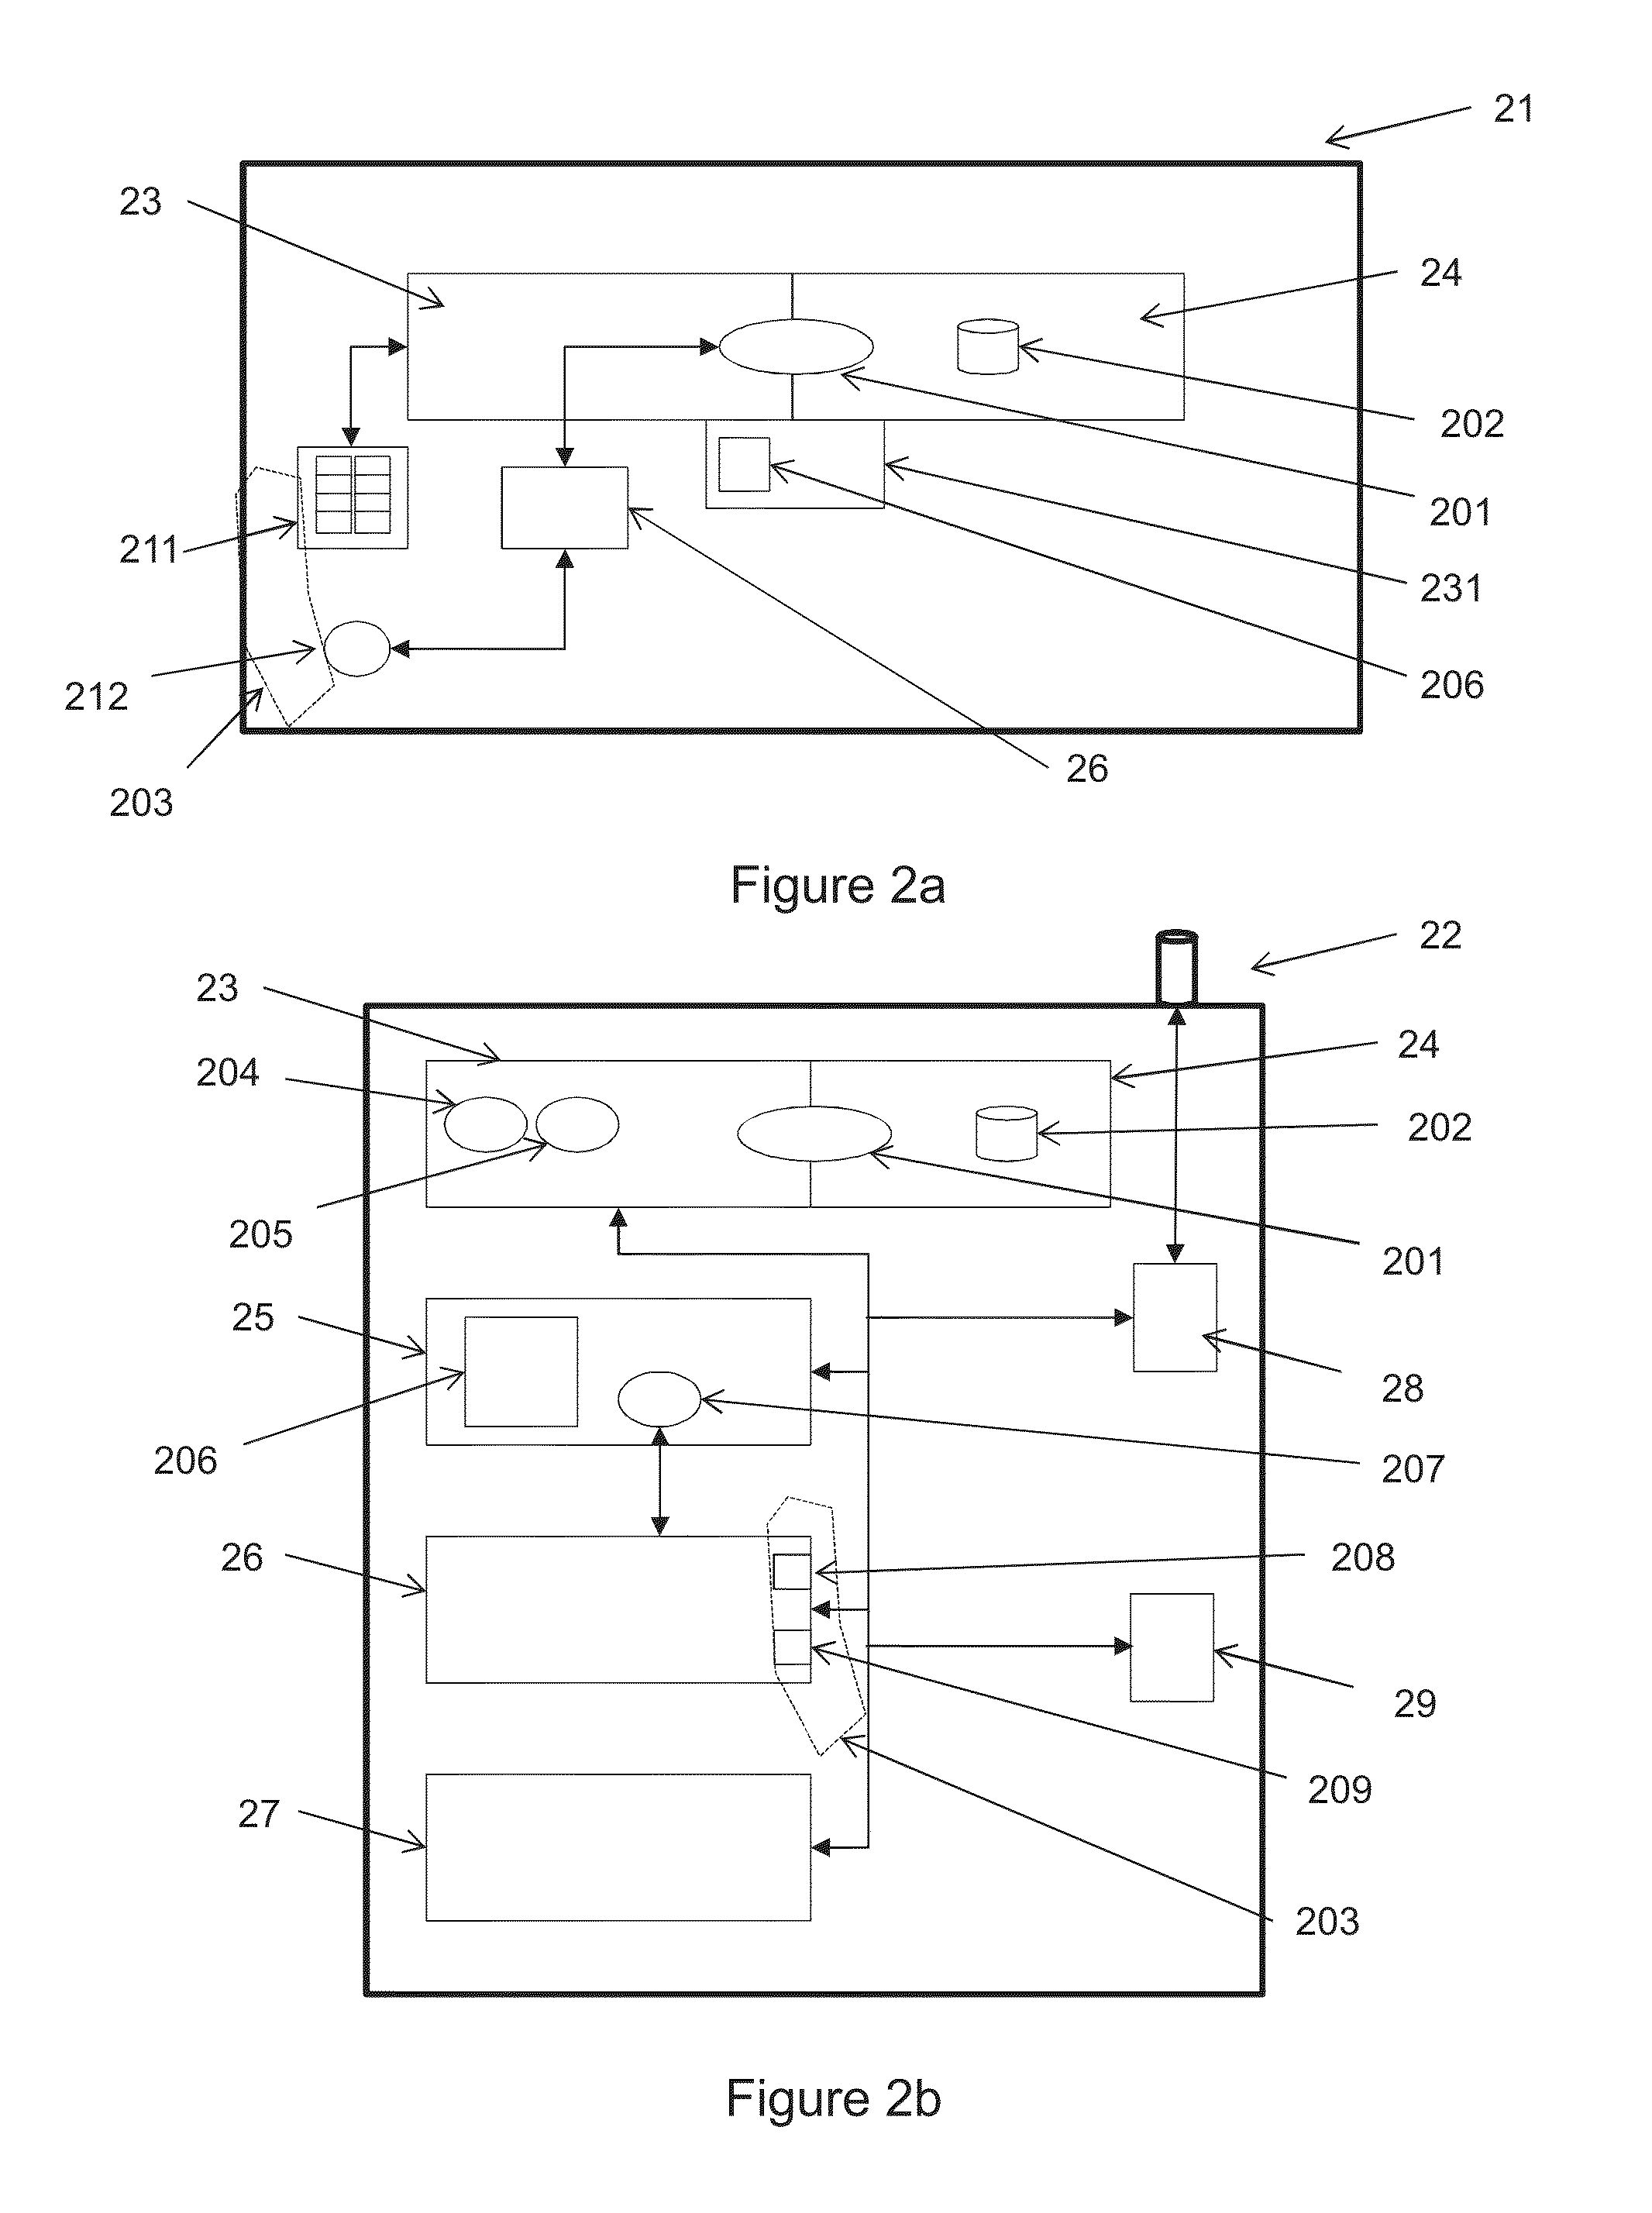 Method and system for local evaluation of computer